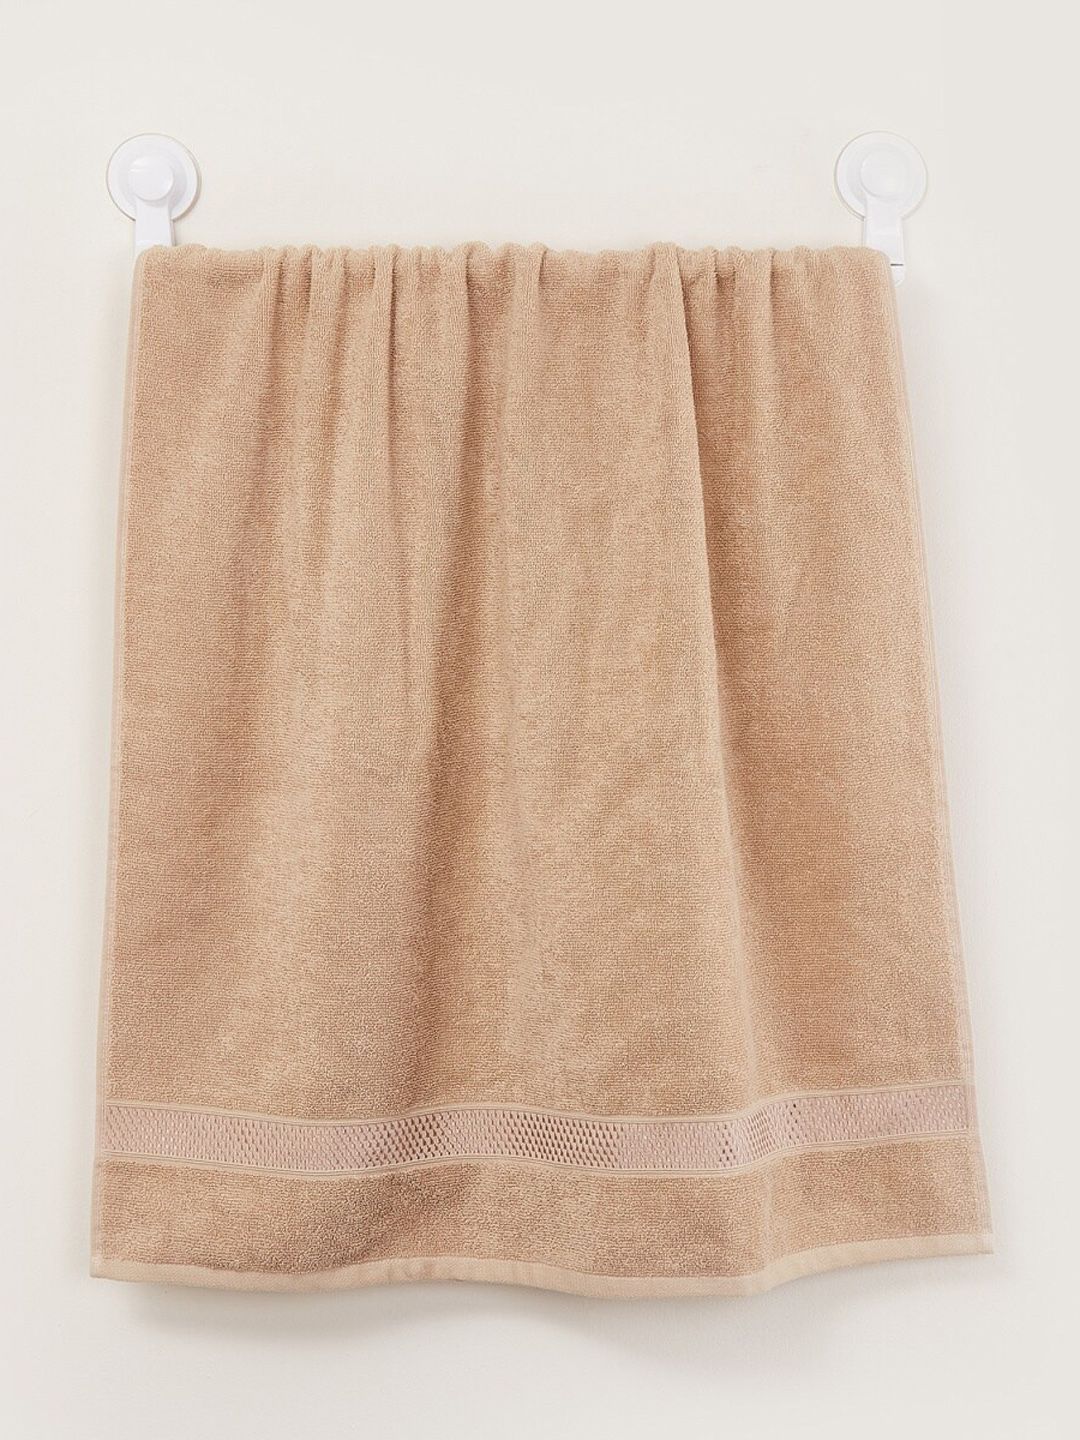 Home Centre Beige Solid 450 GSM Cotton Bath Towel Price in India